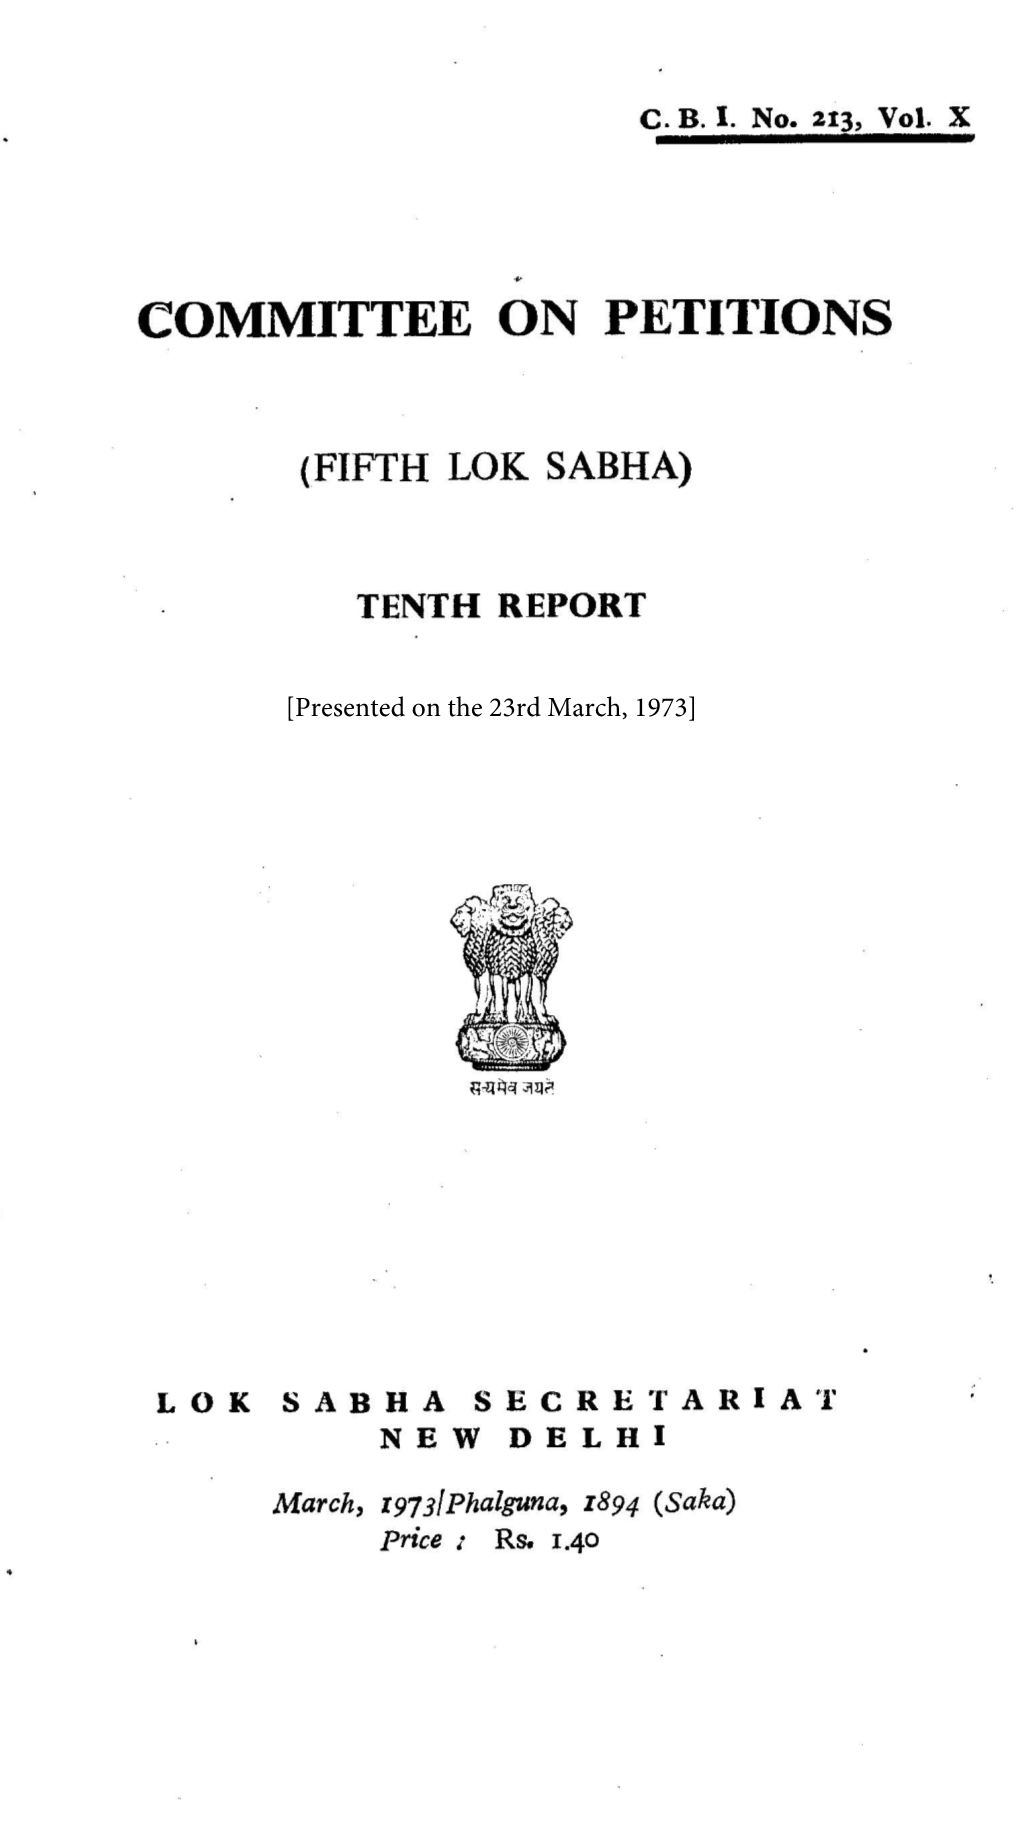 [Presented on the 23Rd March, 1973] CONTENTS